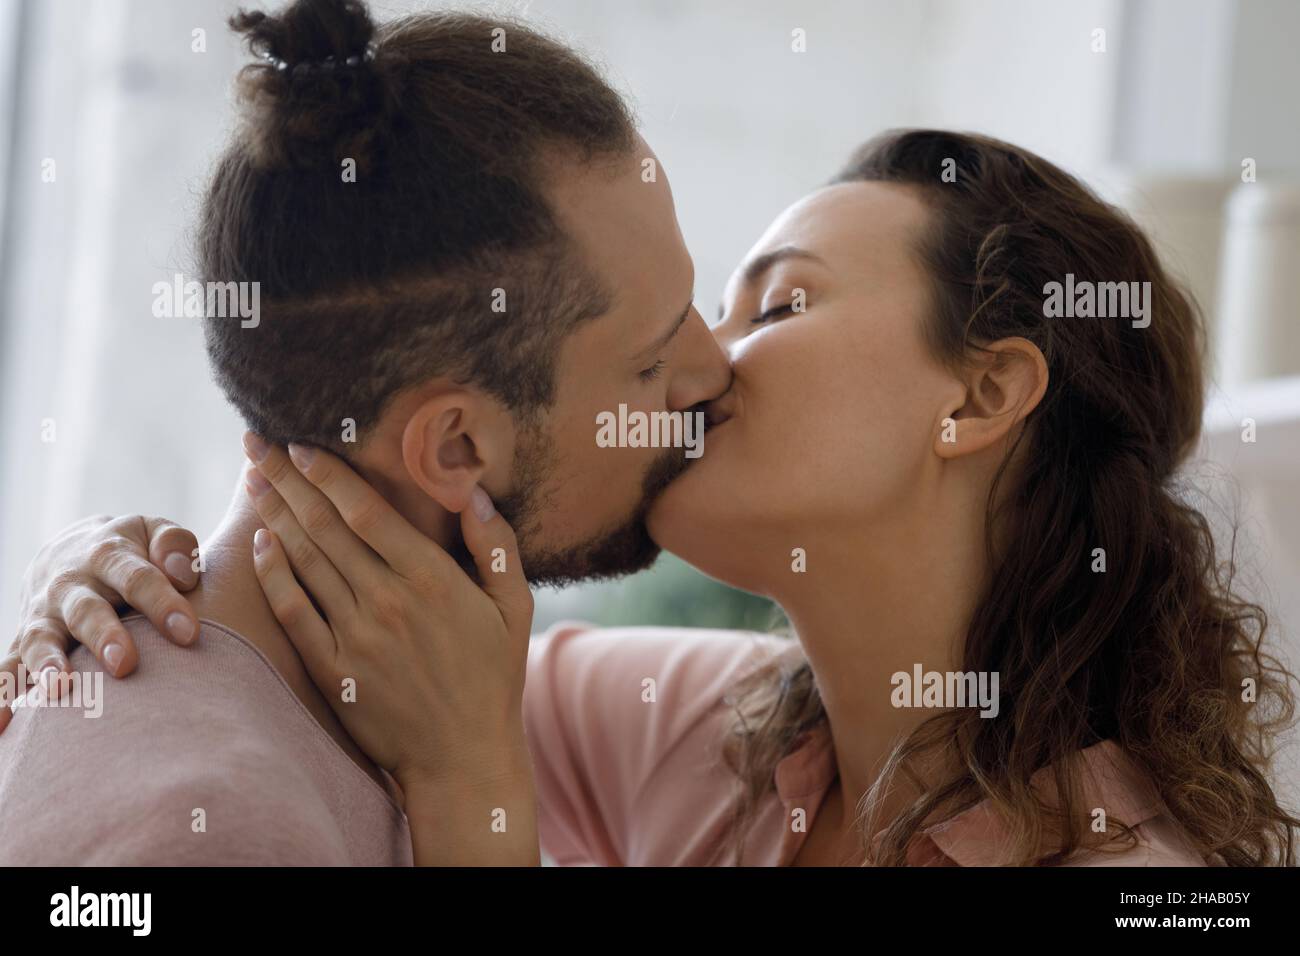 Sweet romantic couple in love kissing on lips at home Stock Photo